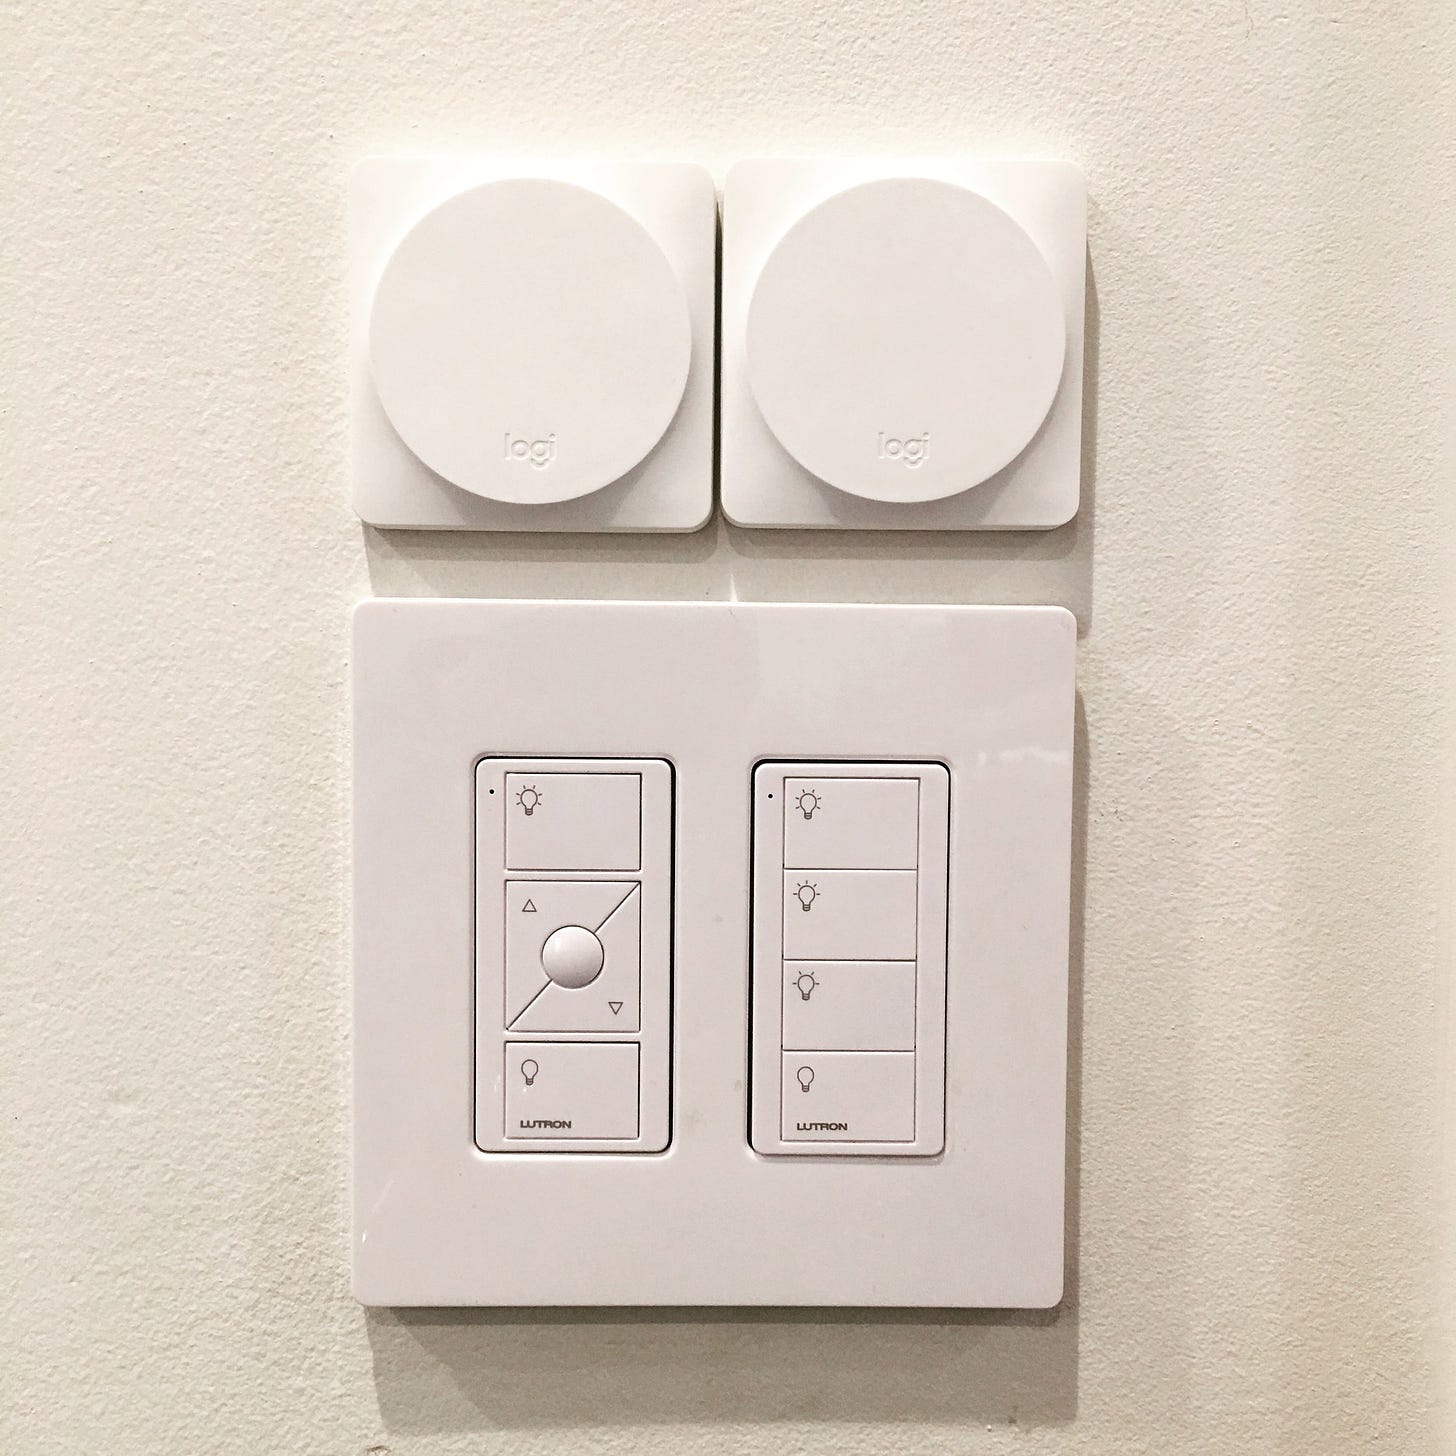 Here are two POP buttons in my house, above the Lutron switches